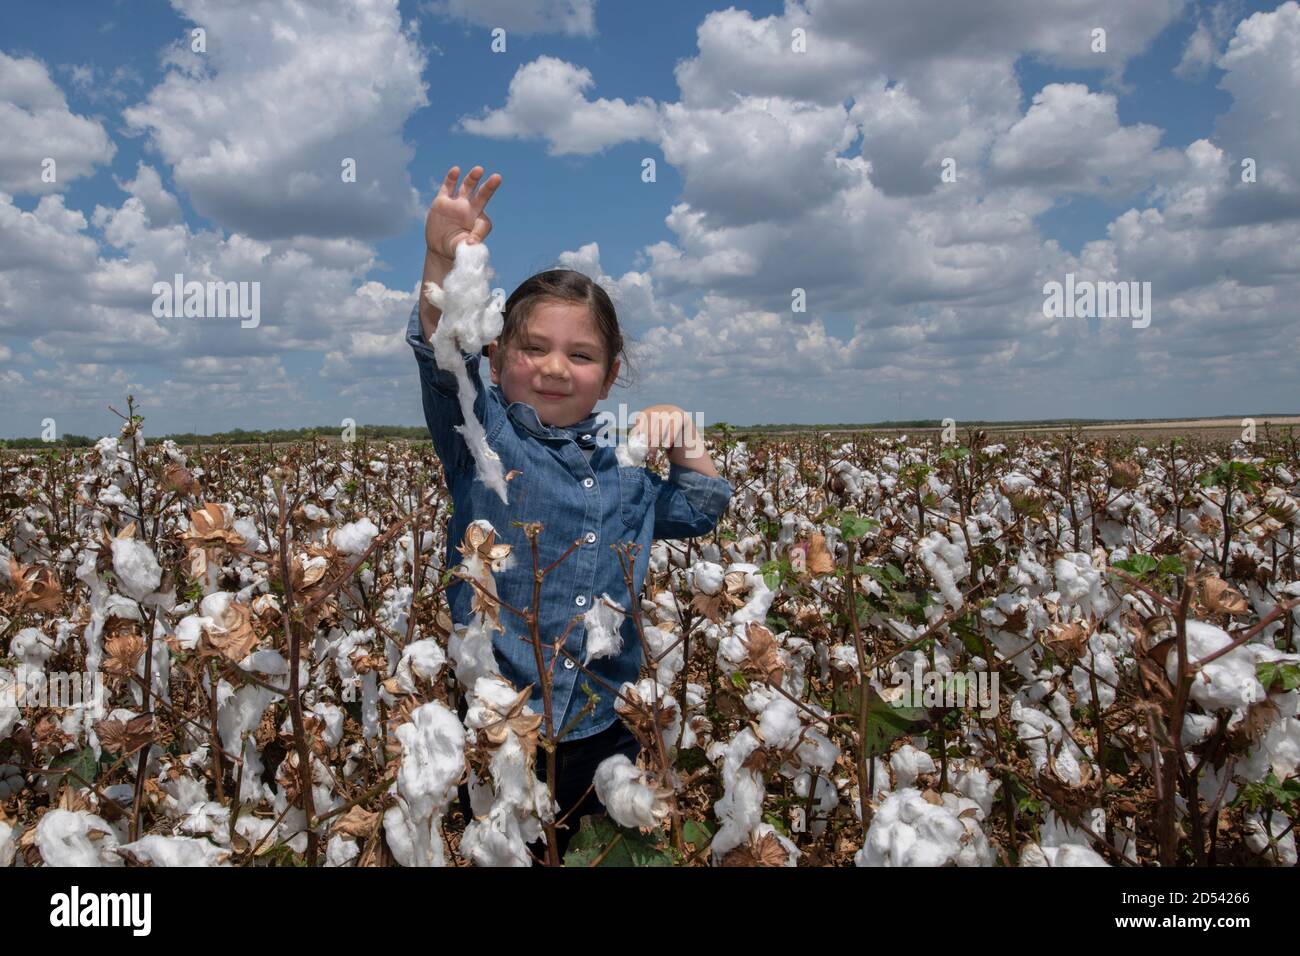 Daphne Salinas, age four, plays with a freshly picked cotton boll during the cotton harvest on the Schirmir Farm August 23, 2020 in Batesville, Texas. Stock Photo